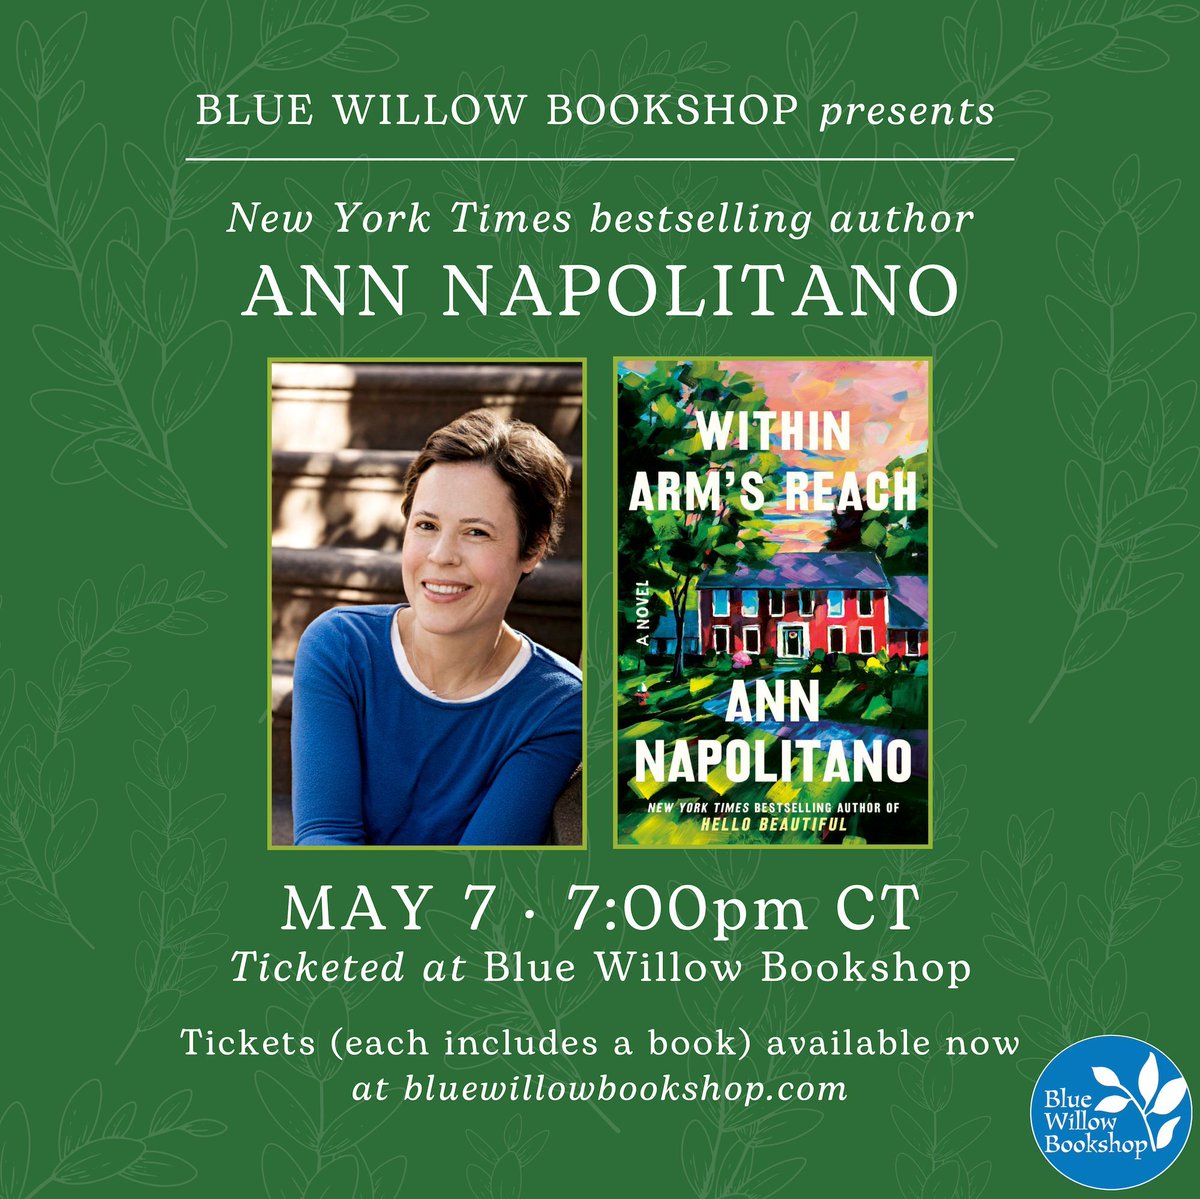 Next week, we're thrilled to welcome staff favorite and New York Times bestselling author @napolitanoann (HELLO BEAUTIFUL) to the bookshop! Get your tickets now to join us to celebrate the paperback release of her novel, WITHIN ARM'S REACH: bluewillowbookshop.com/event/napolita… @randomhouse